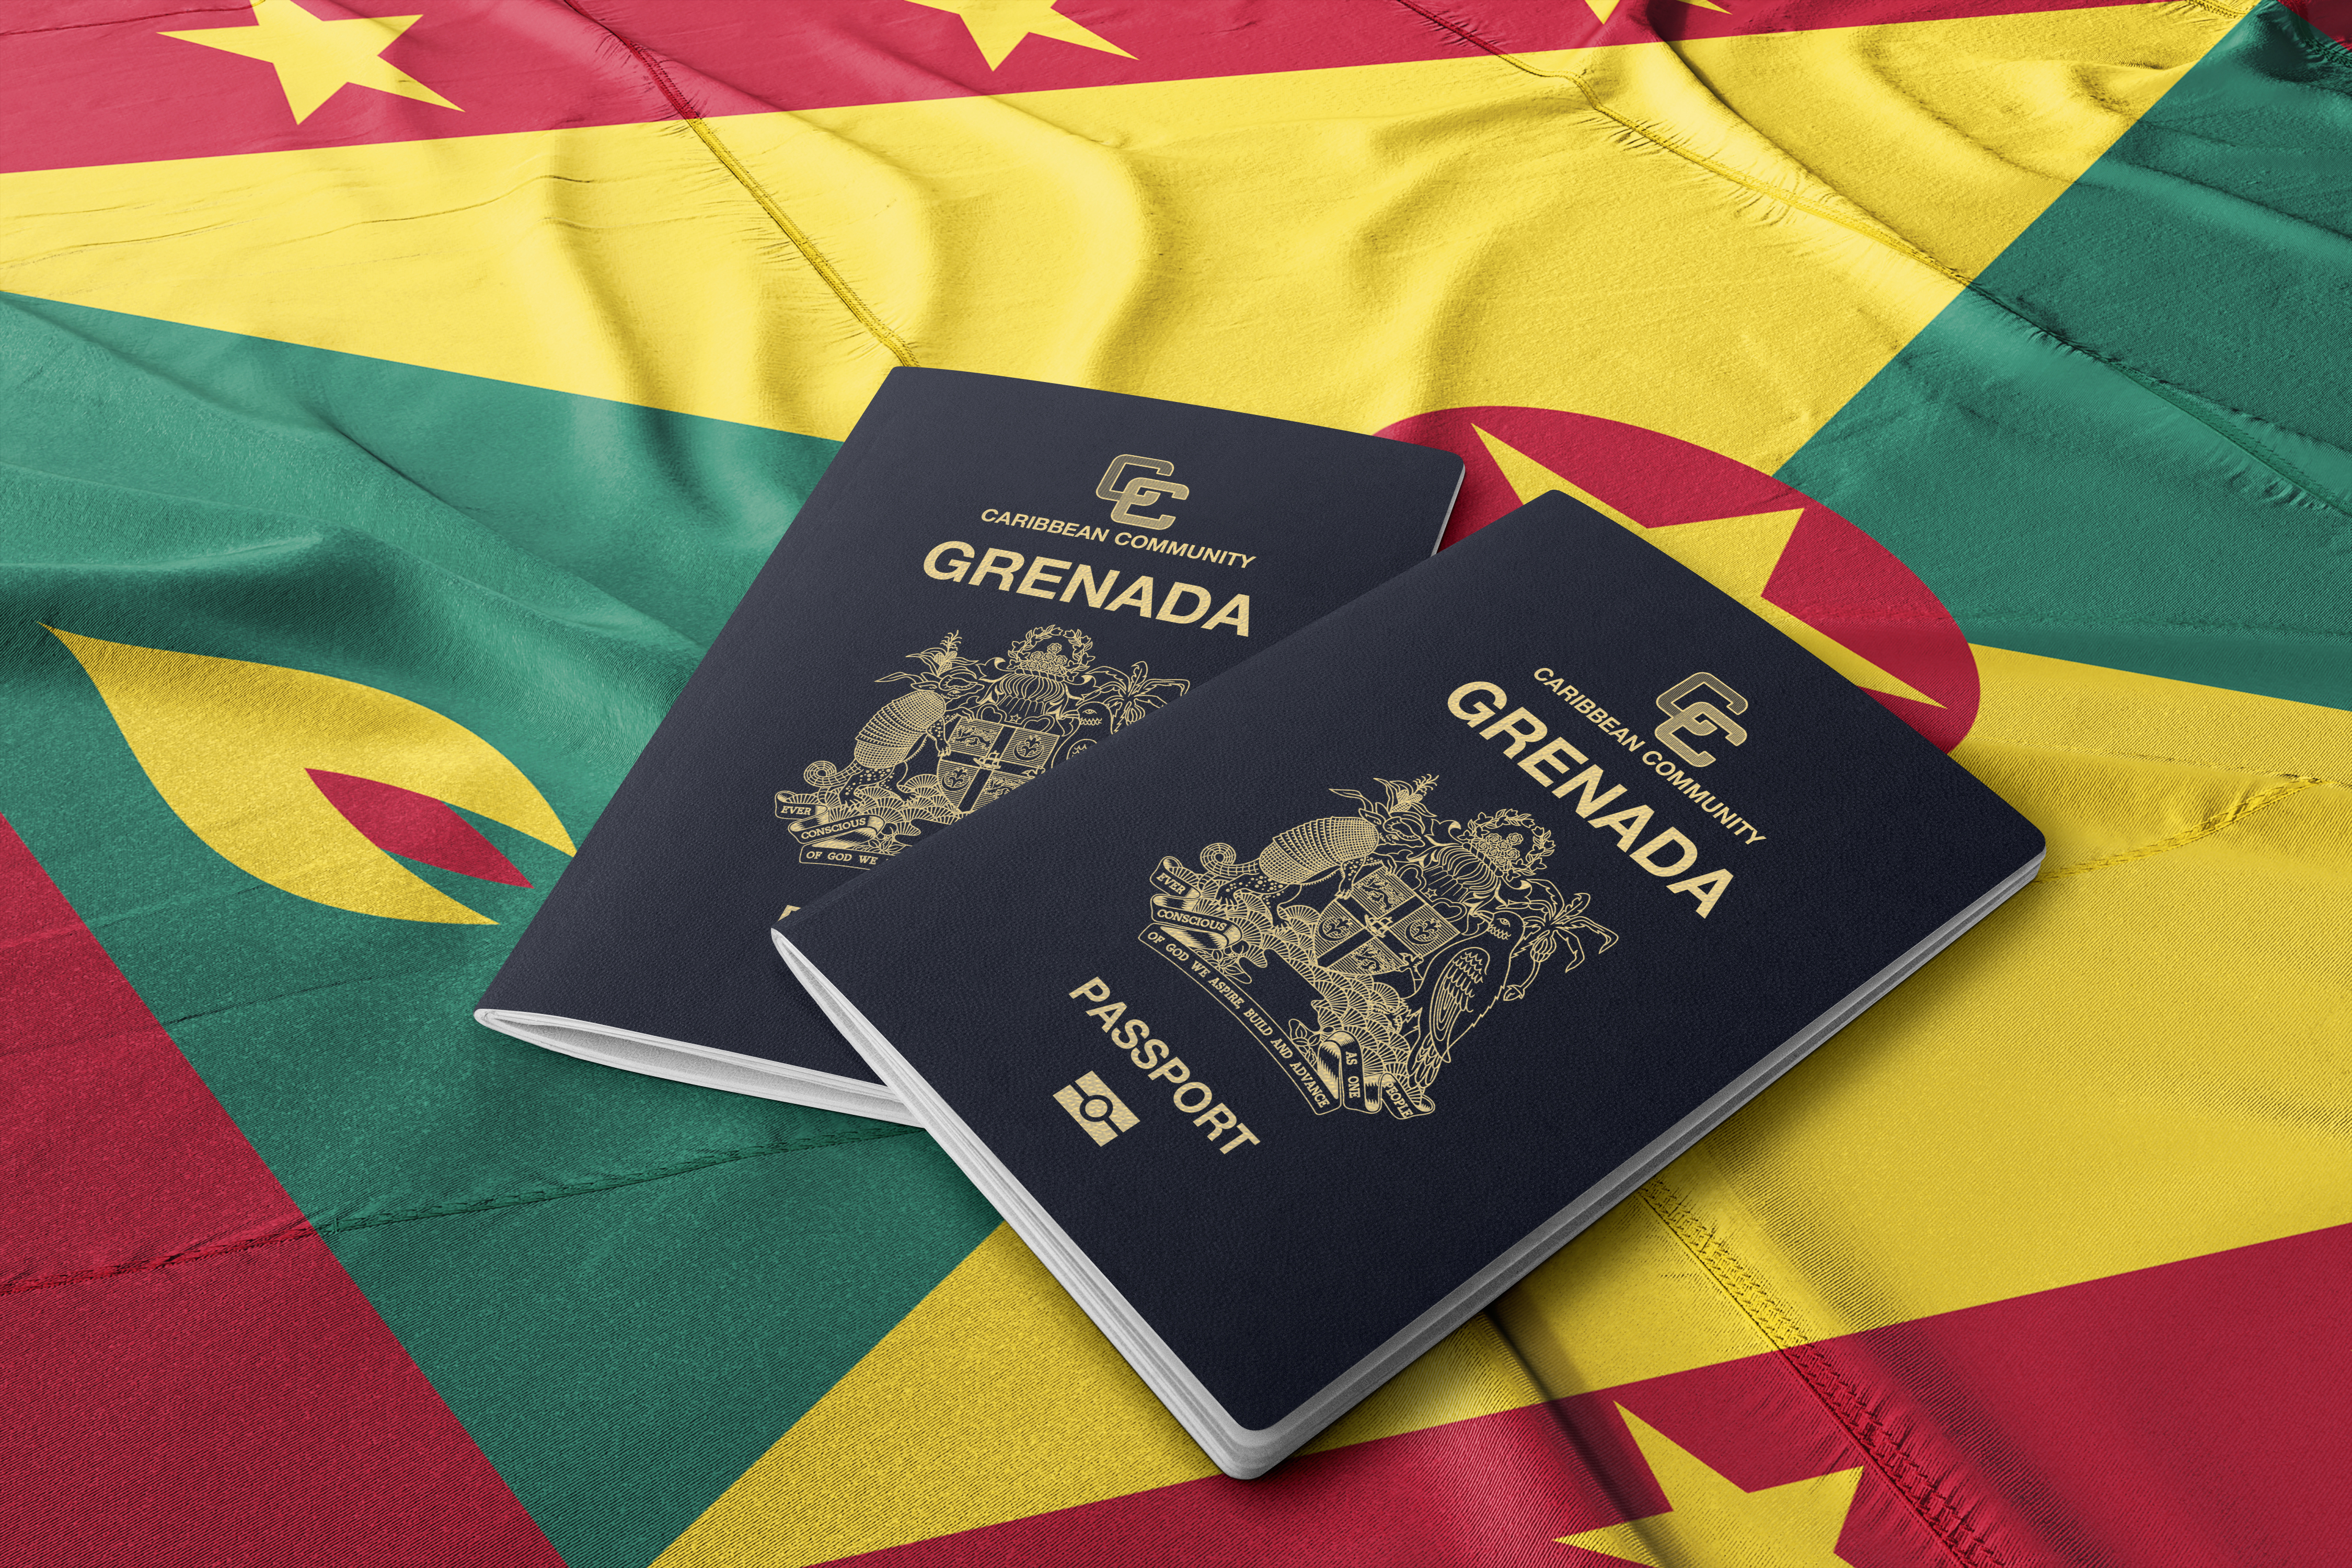 Grenada's passports on the country's flag symbolize Caribbean citizenship